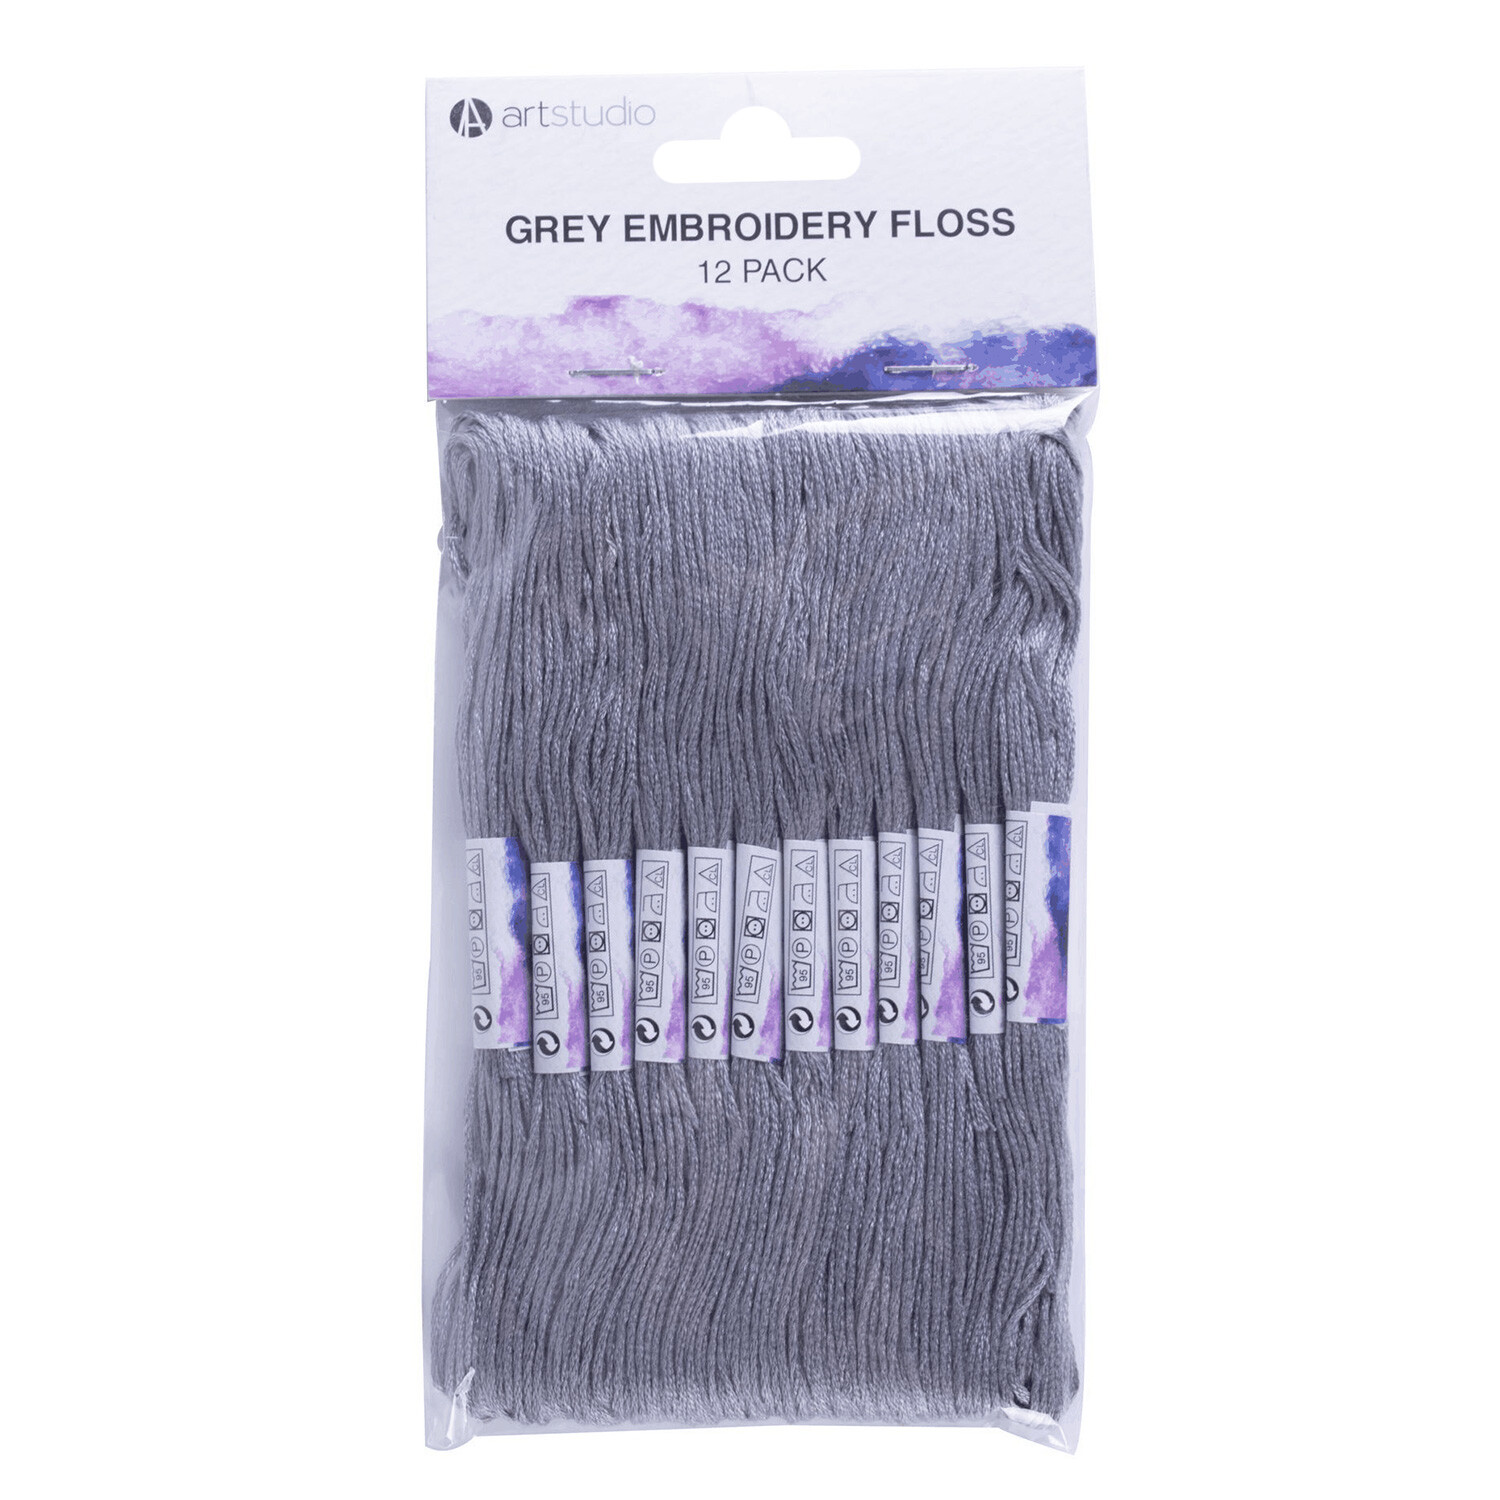 Art Studio Pack of 12 Grey Embroidery Floss - Grey Image 1